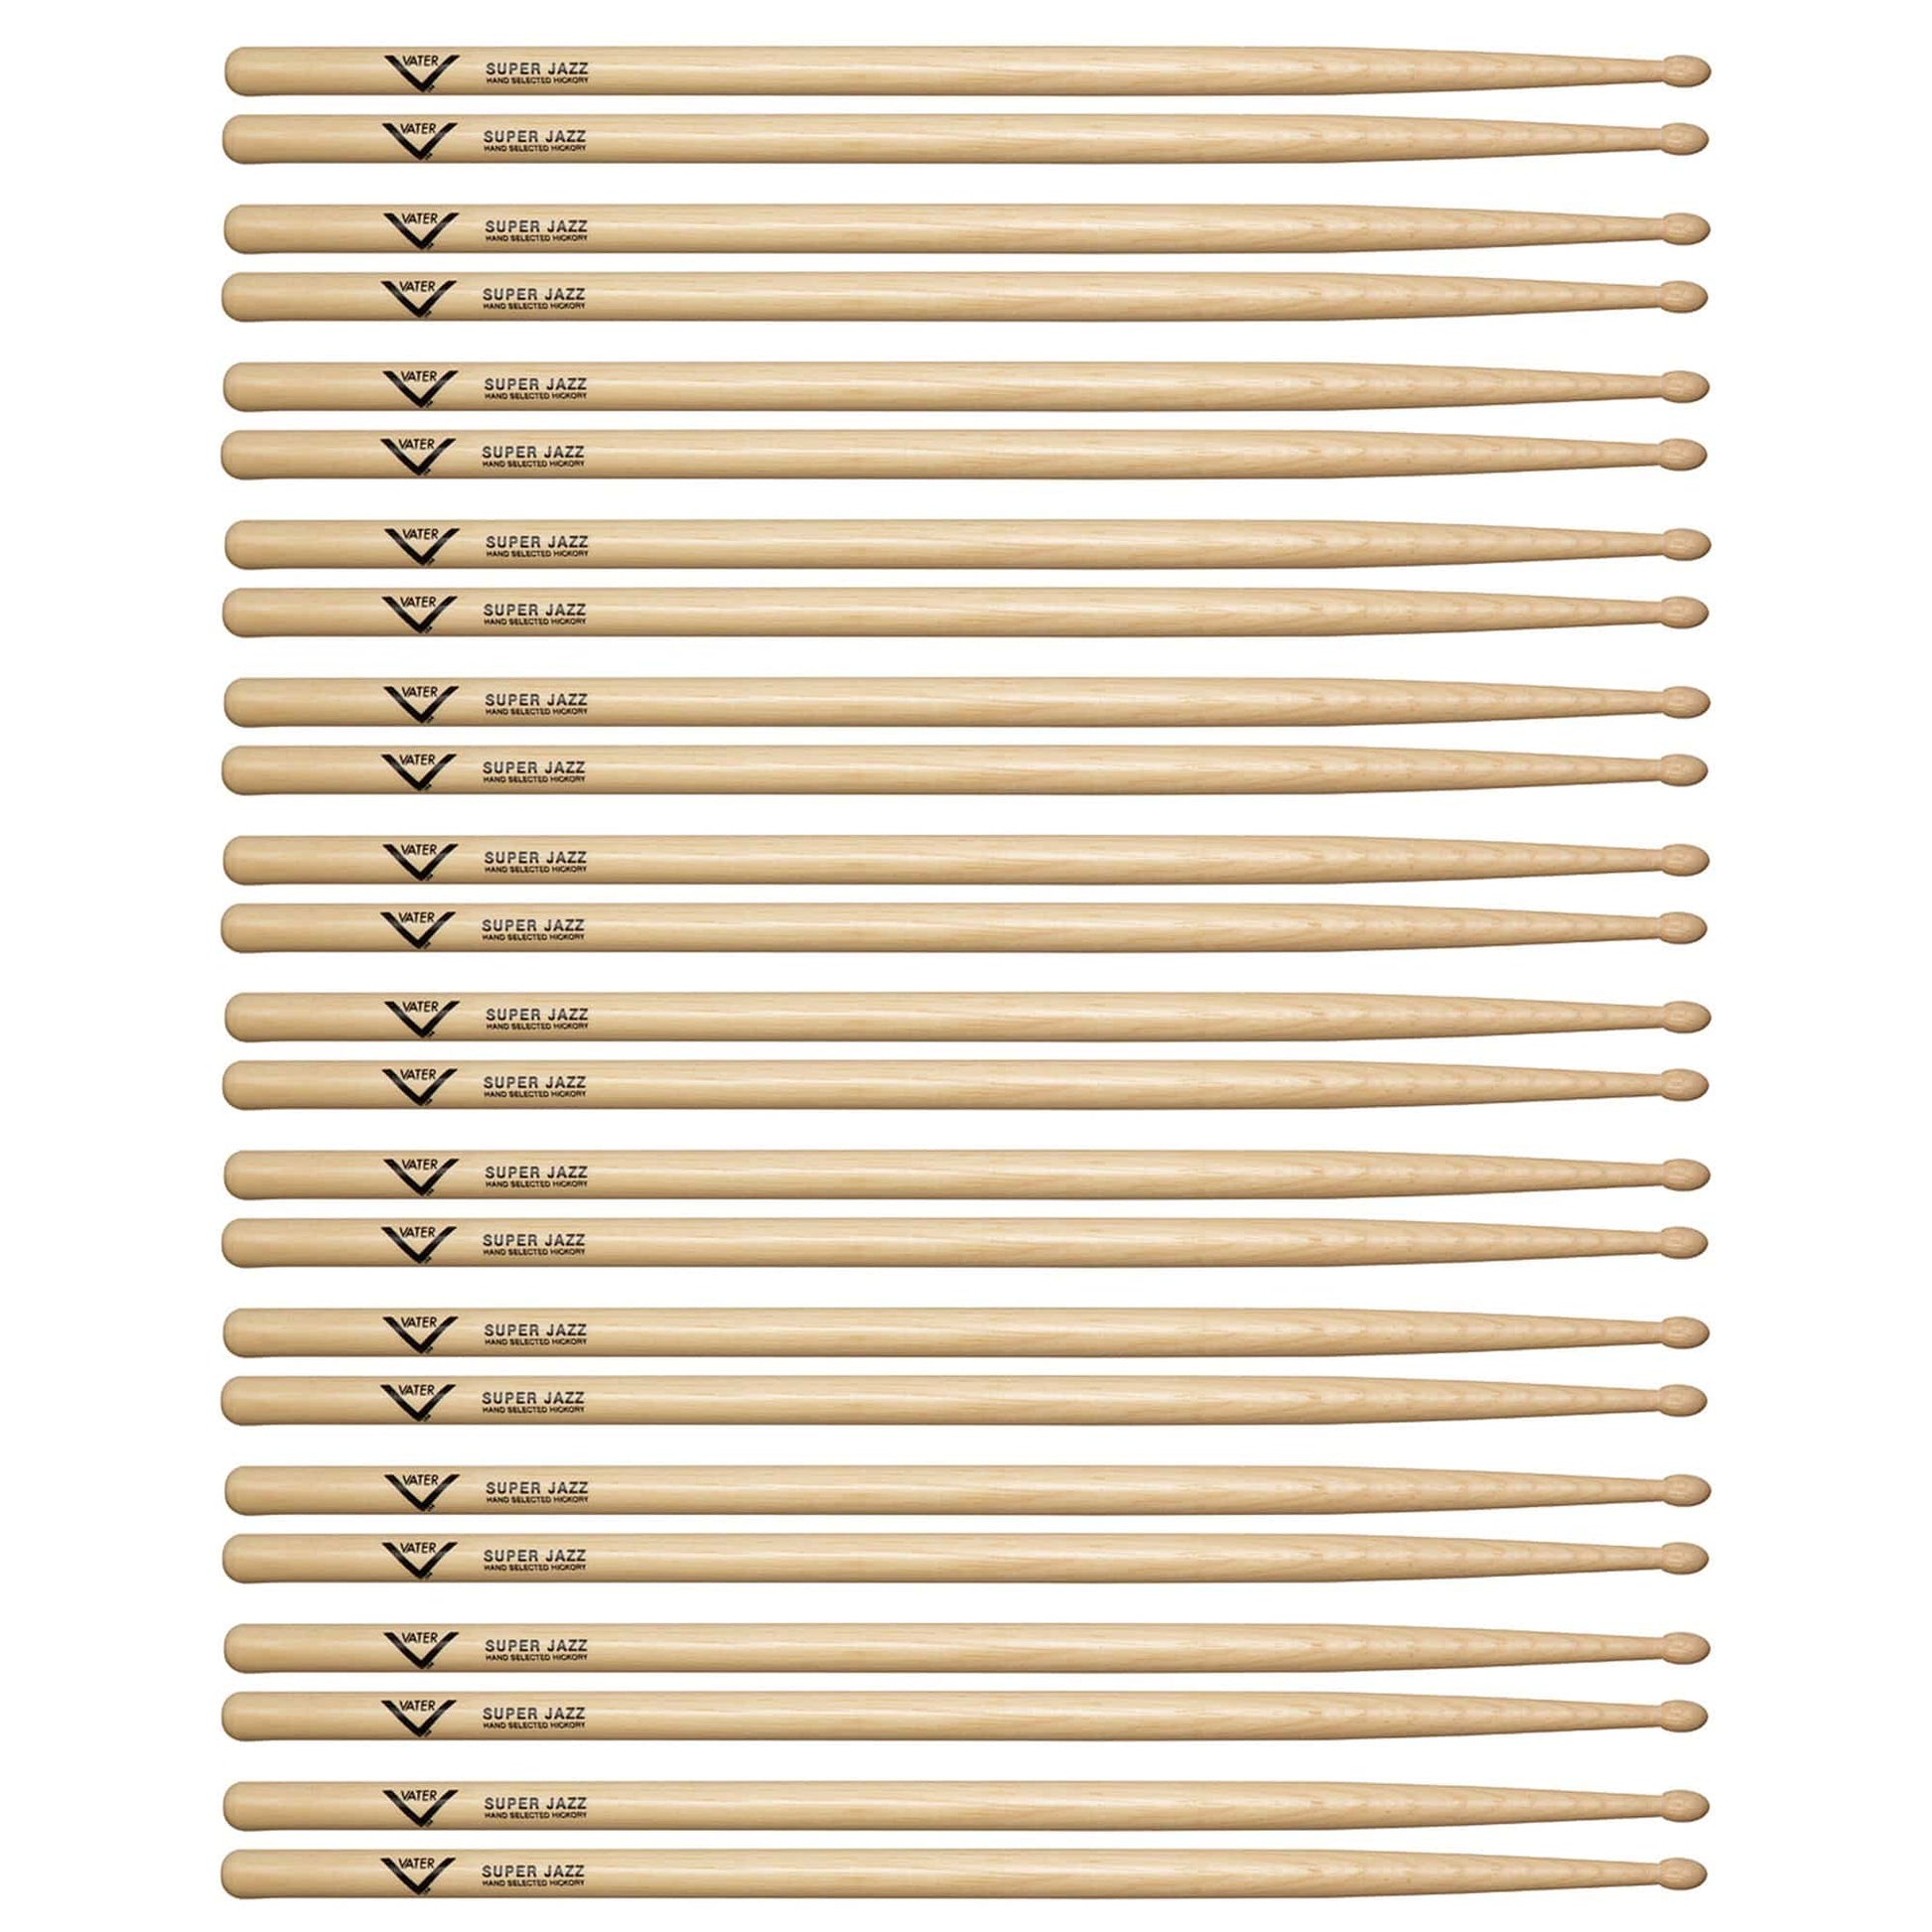 Vater Hickory Super Jazz Wood Tip Drum Sticks (12 Pair Bundle) Drums and Percussion / Parts and Accessories / Drum Sticks and Mallets